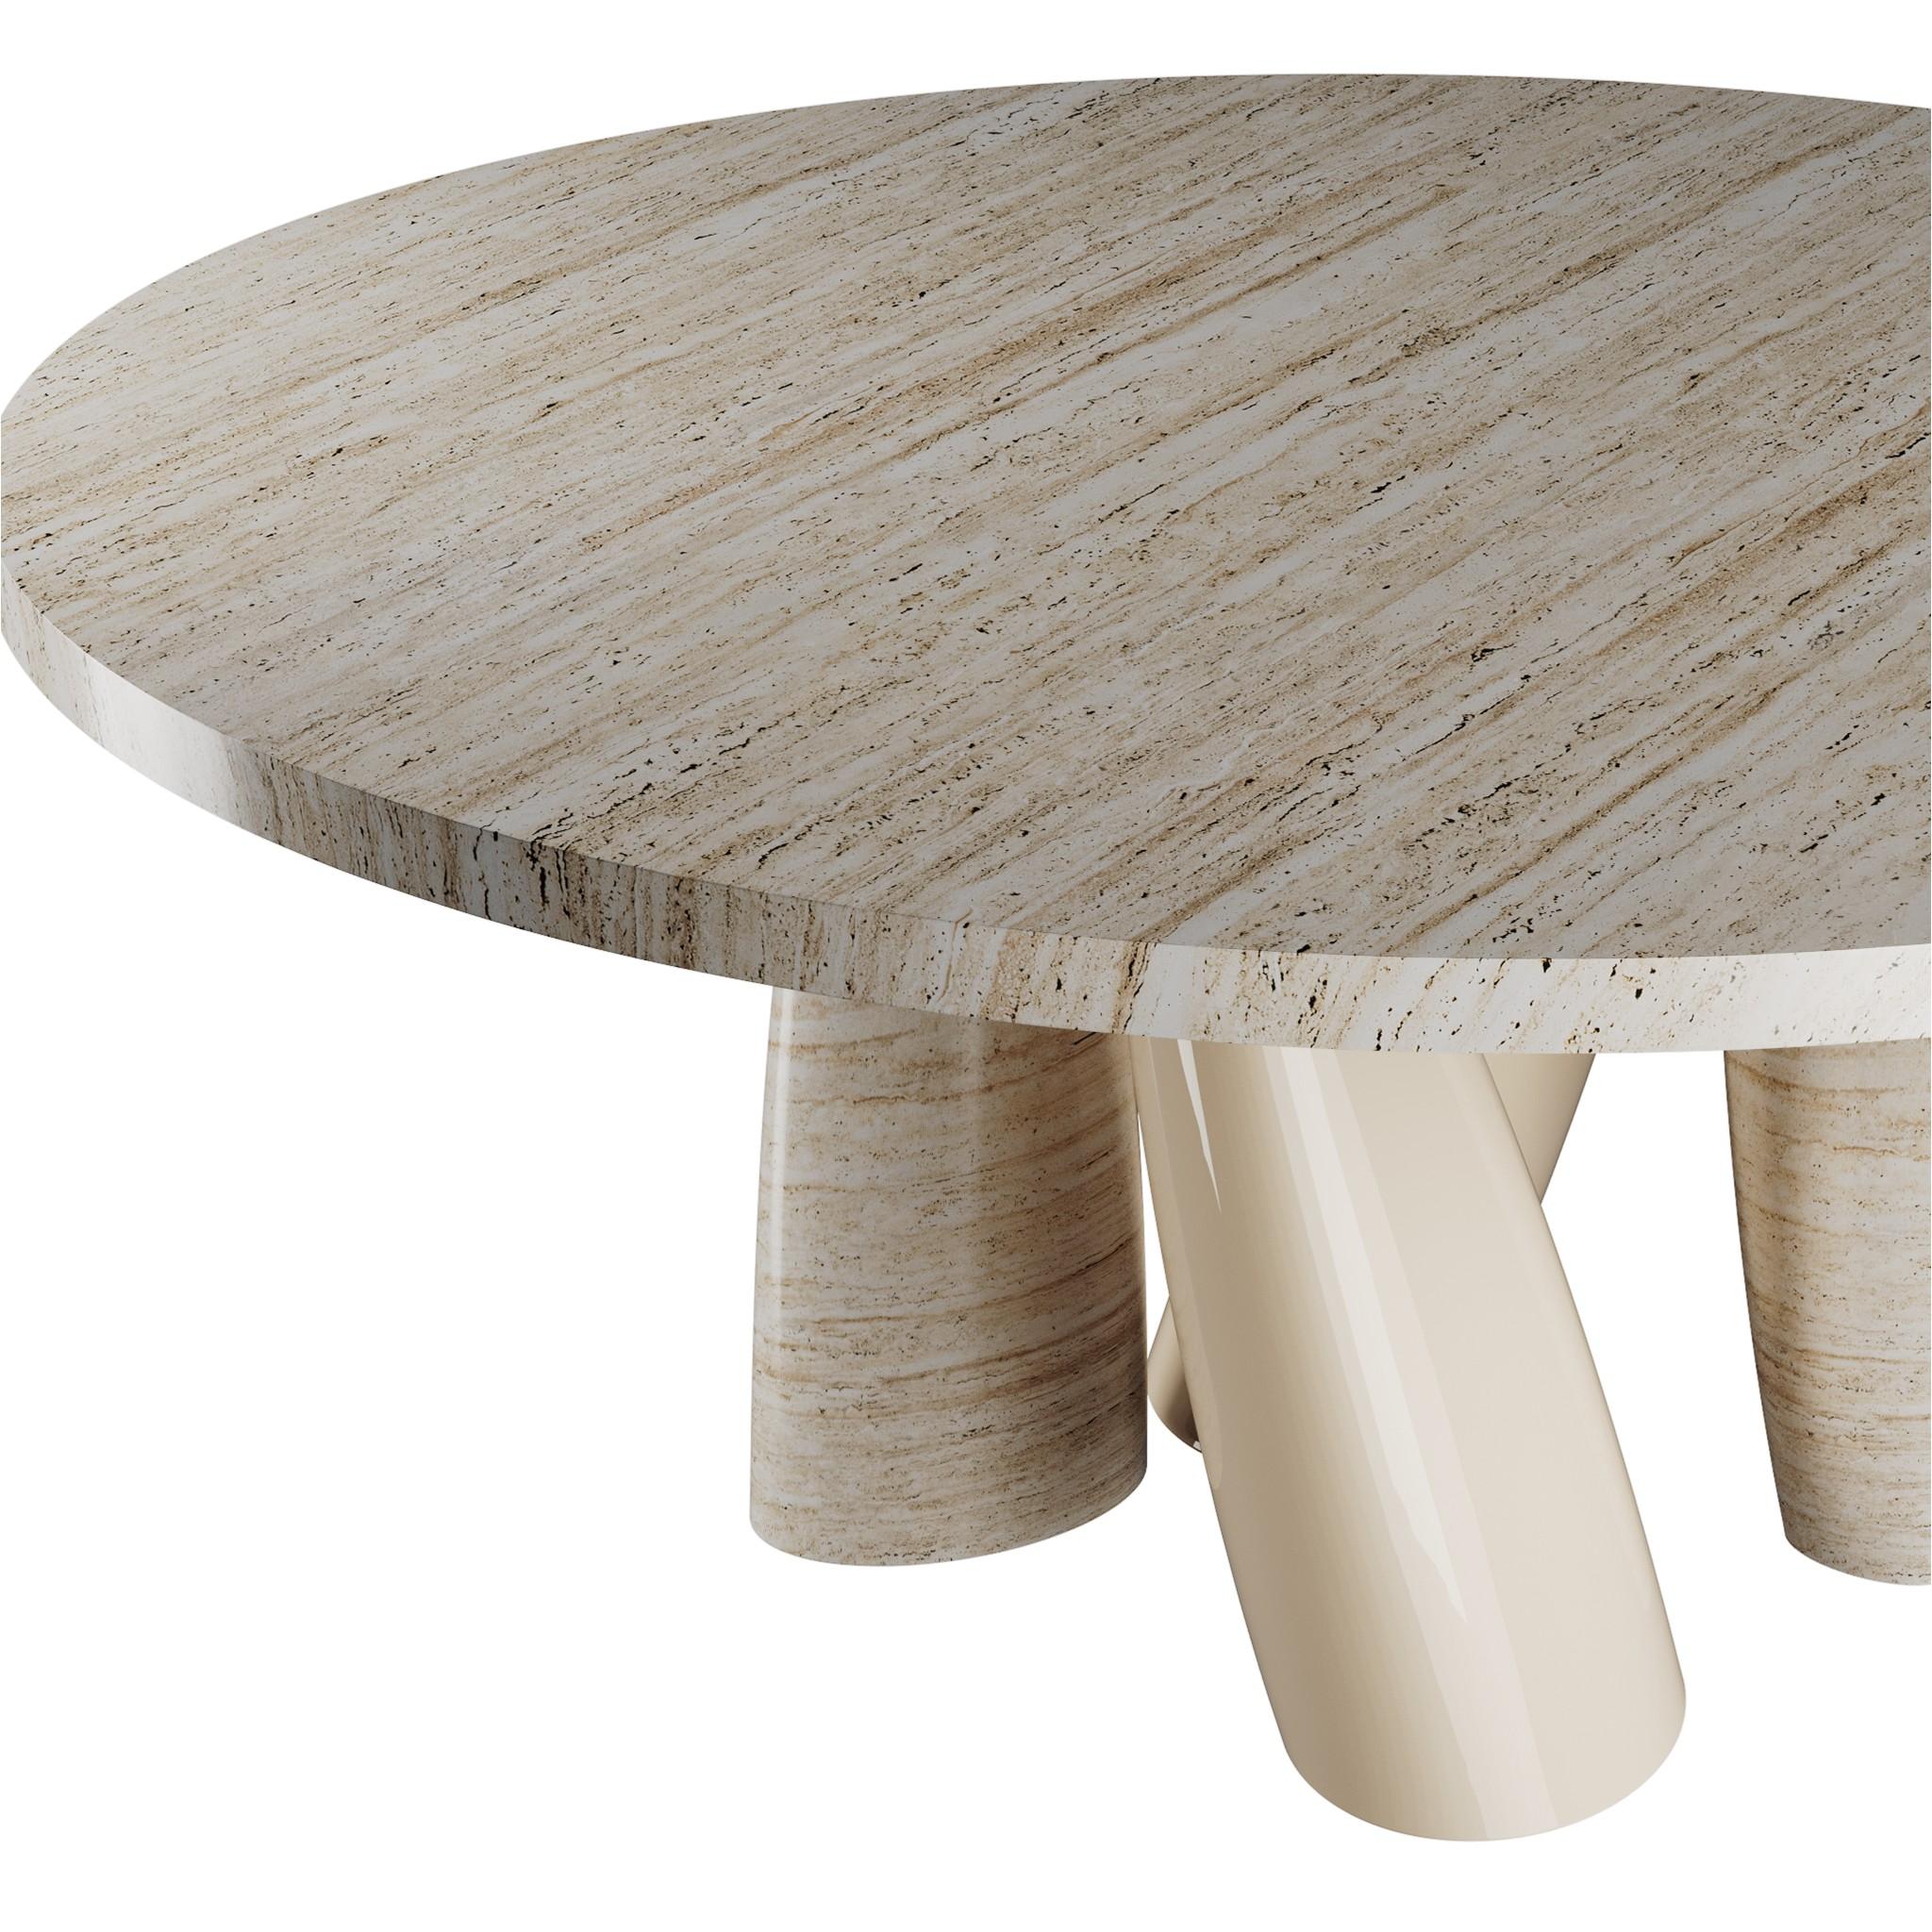 Scandinavian Modern Minimal Organic Modern White Round Dining Table in Travertine Marble Lacquered For Sale